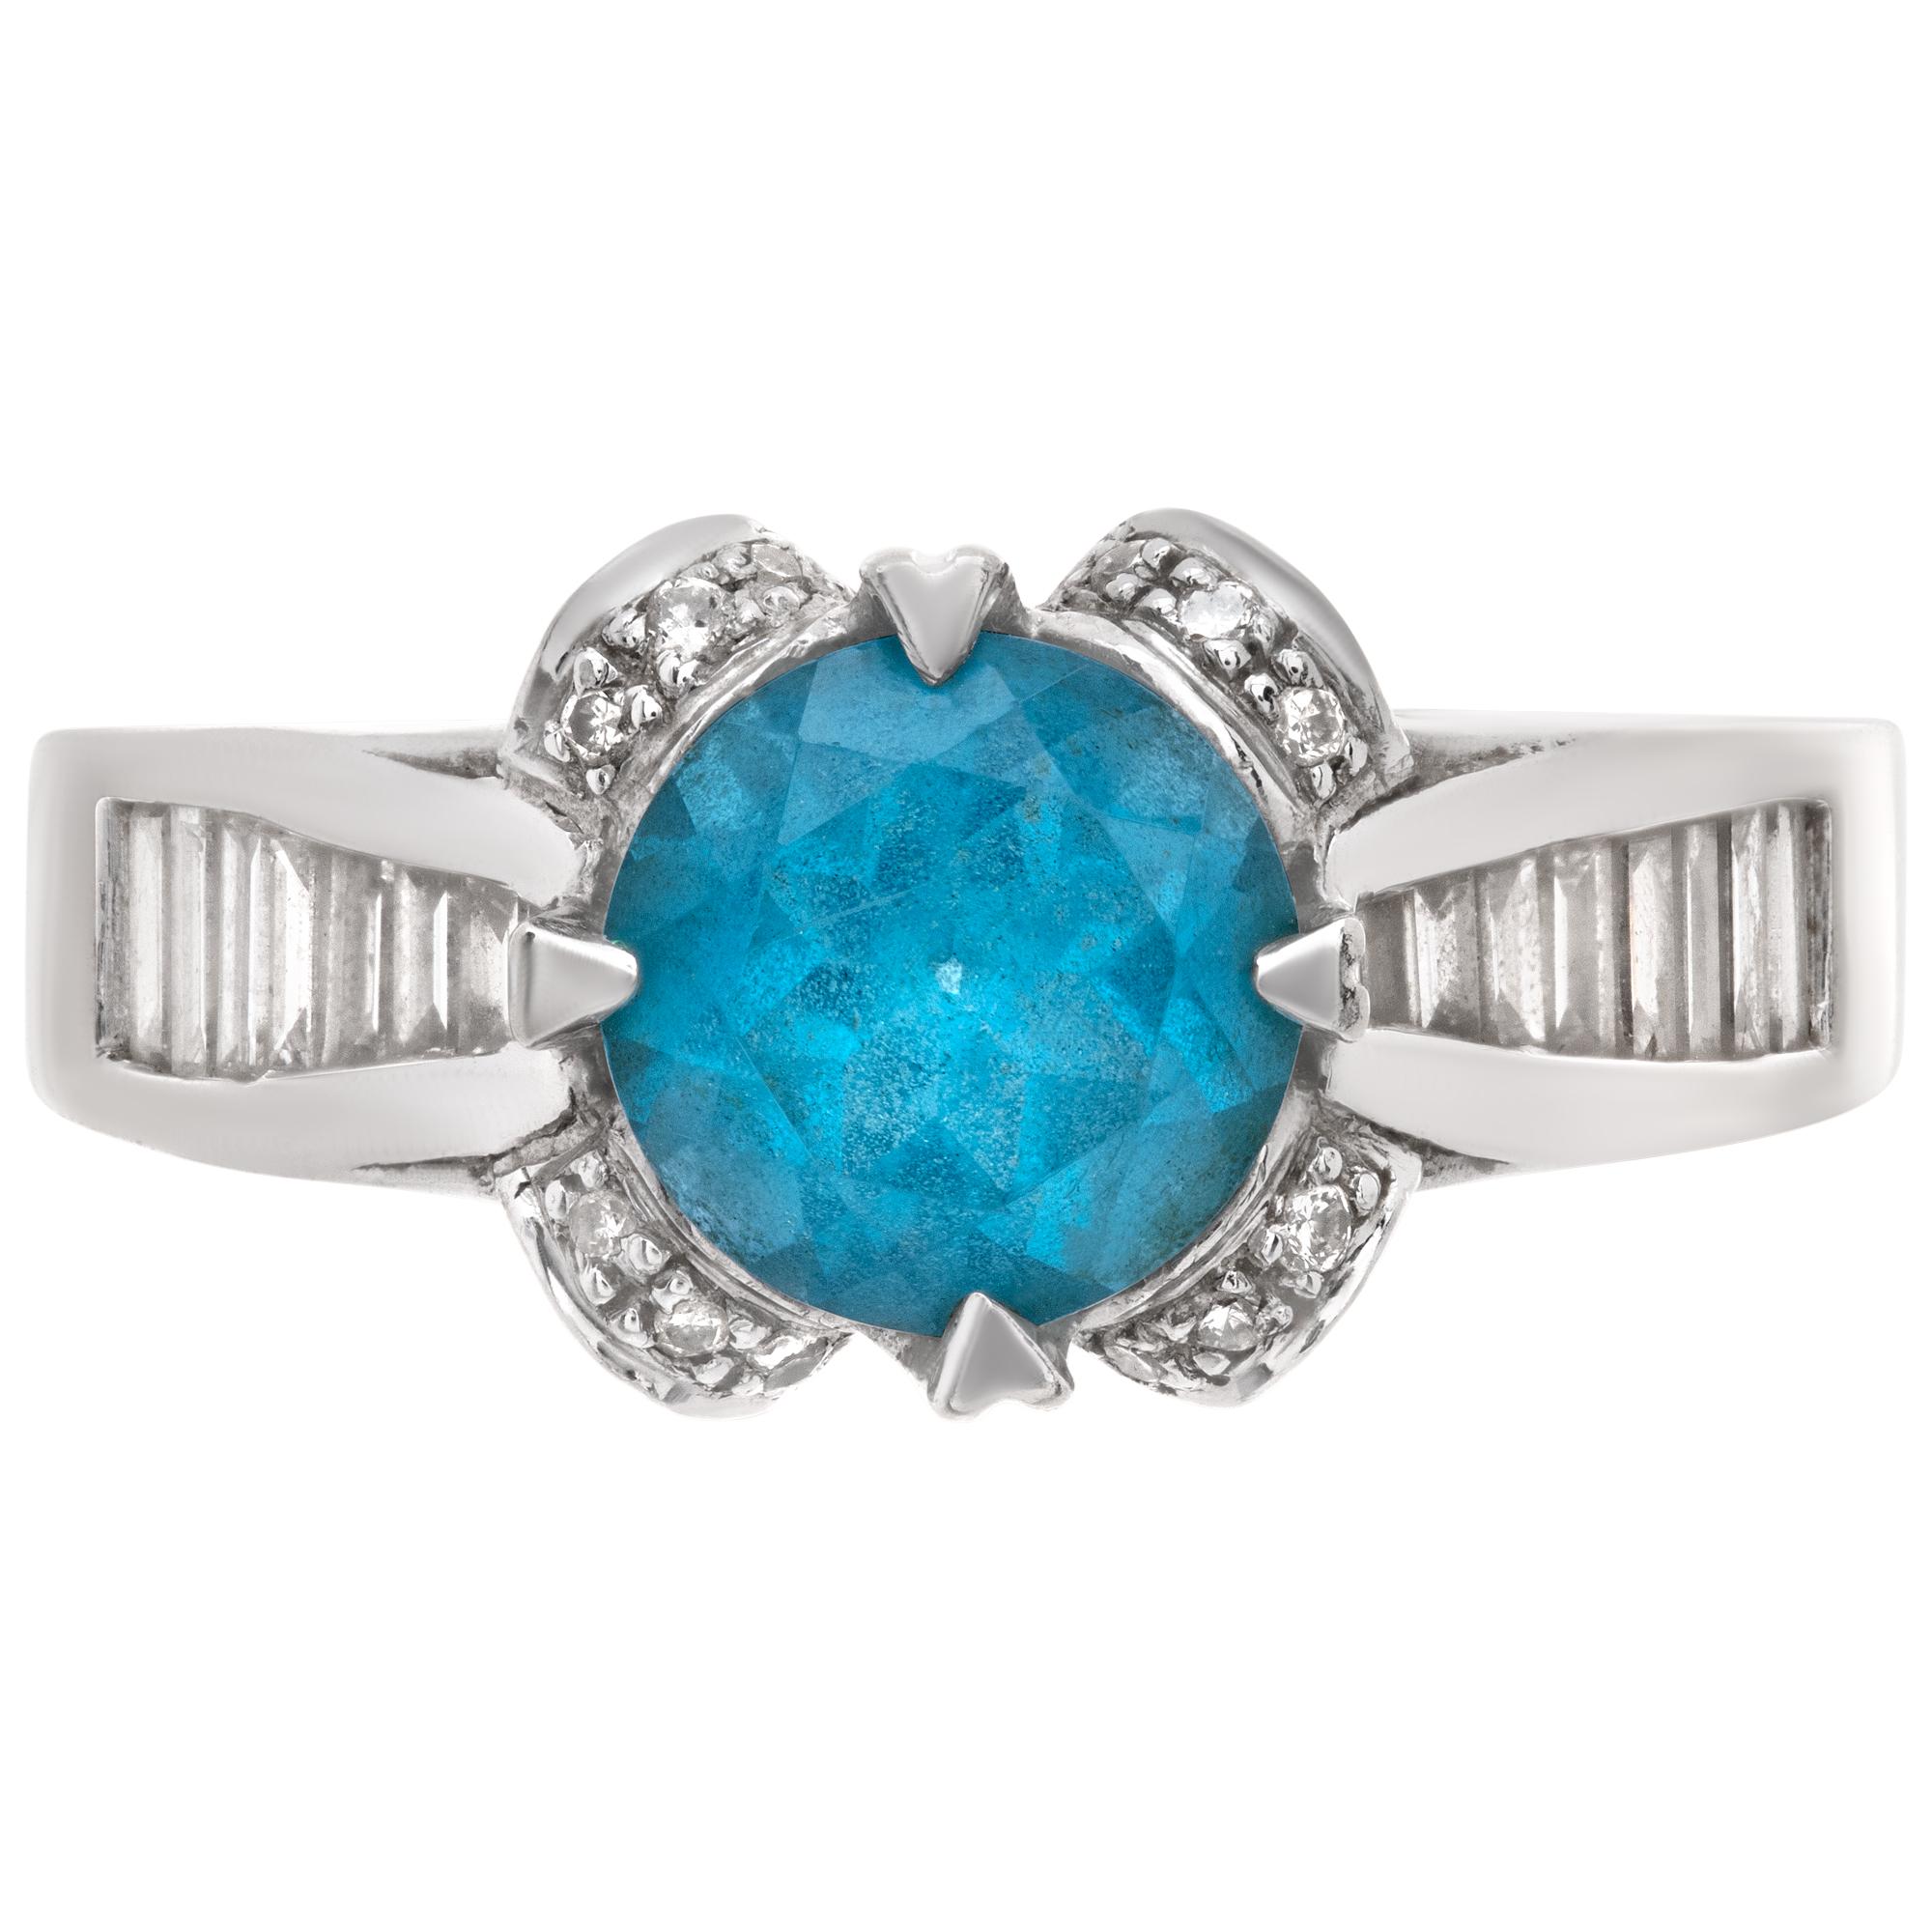 Round brilliant cut blue topaz (1.71 carat) & diamonds ring set in 14k white gold. Round & baguette cut diamonds total approx. weight: 0.66 carats. All diamonds are white and eye clean. 8 x 8mm. Size 5.5This Topaz ring is currently size 5.5 and some